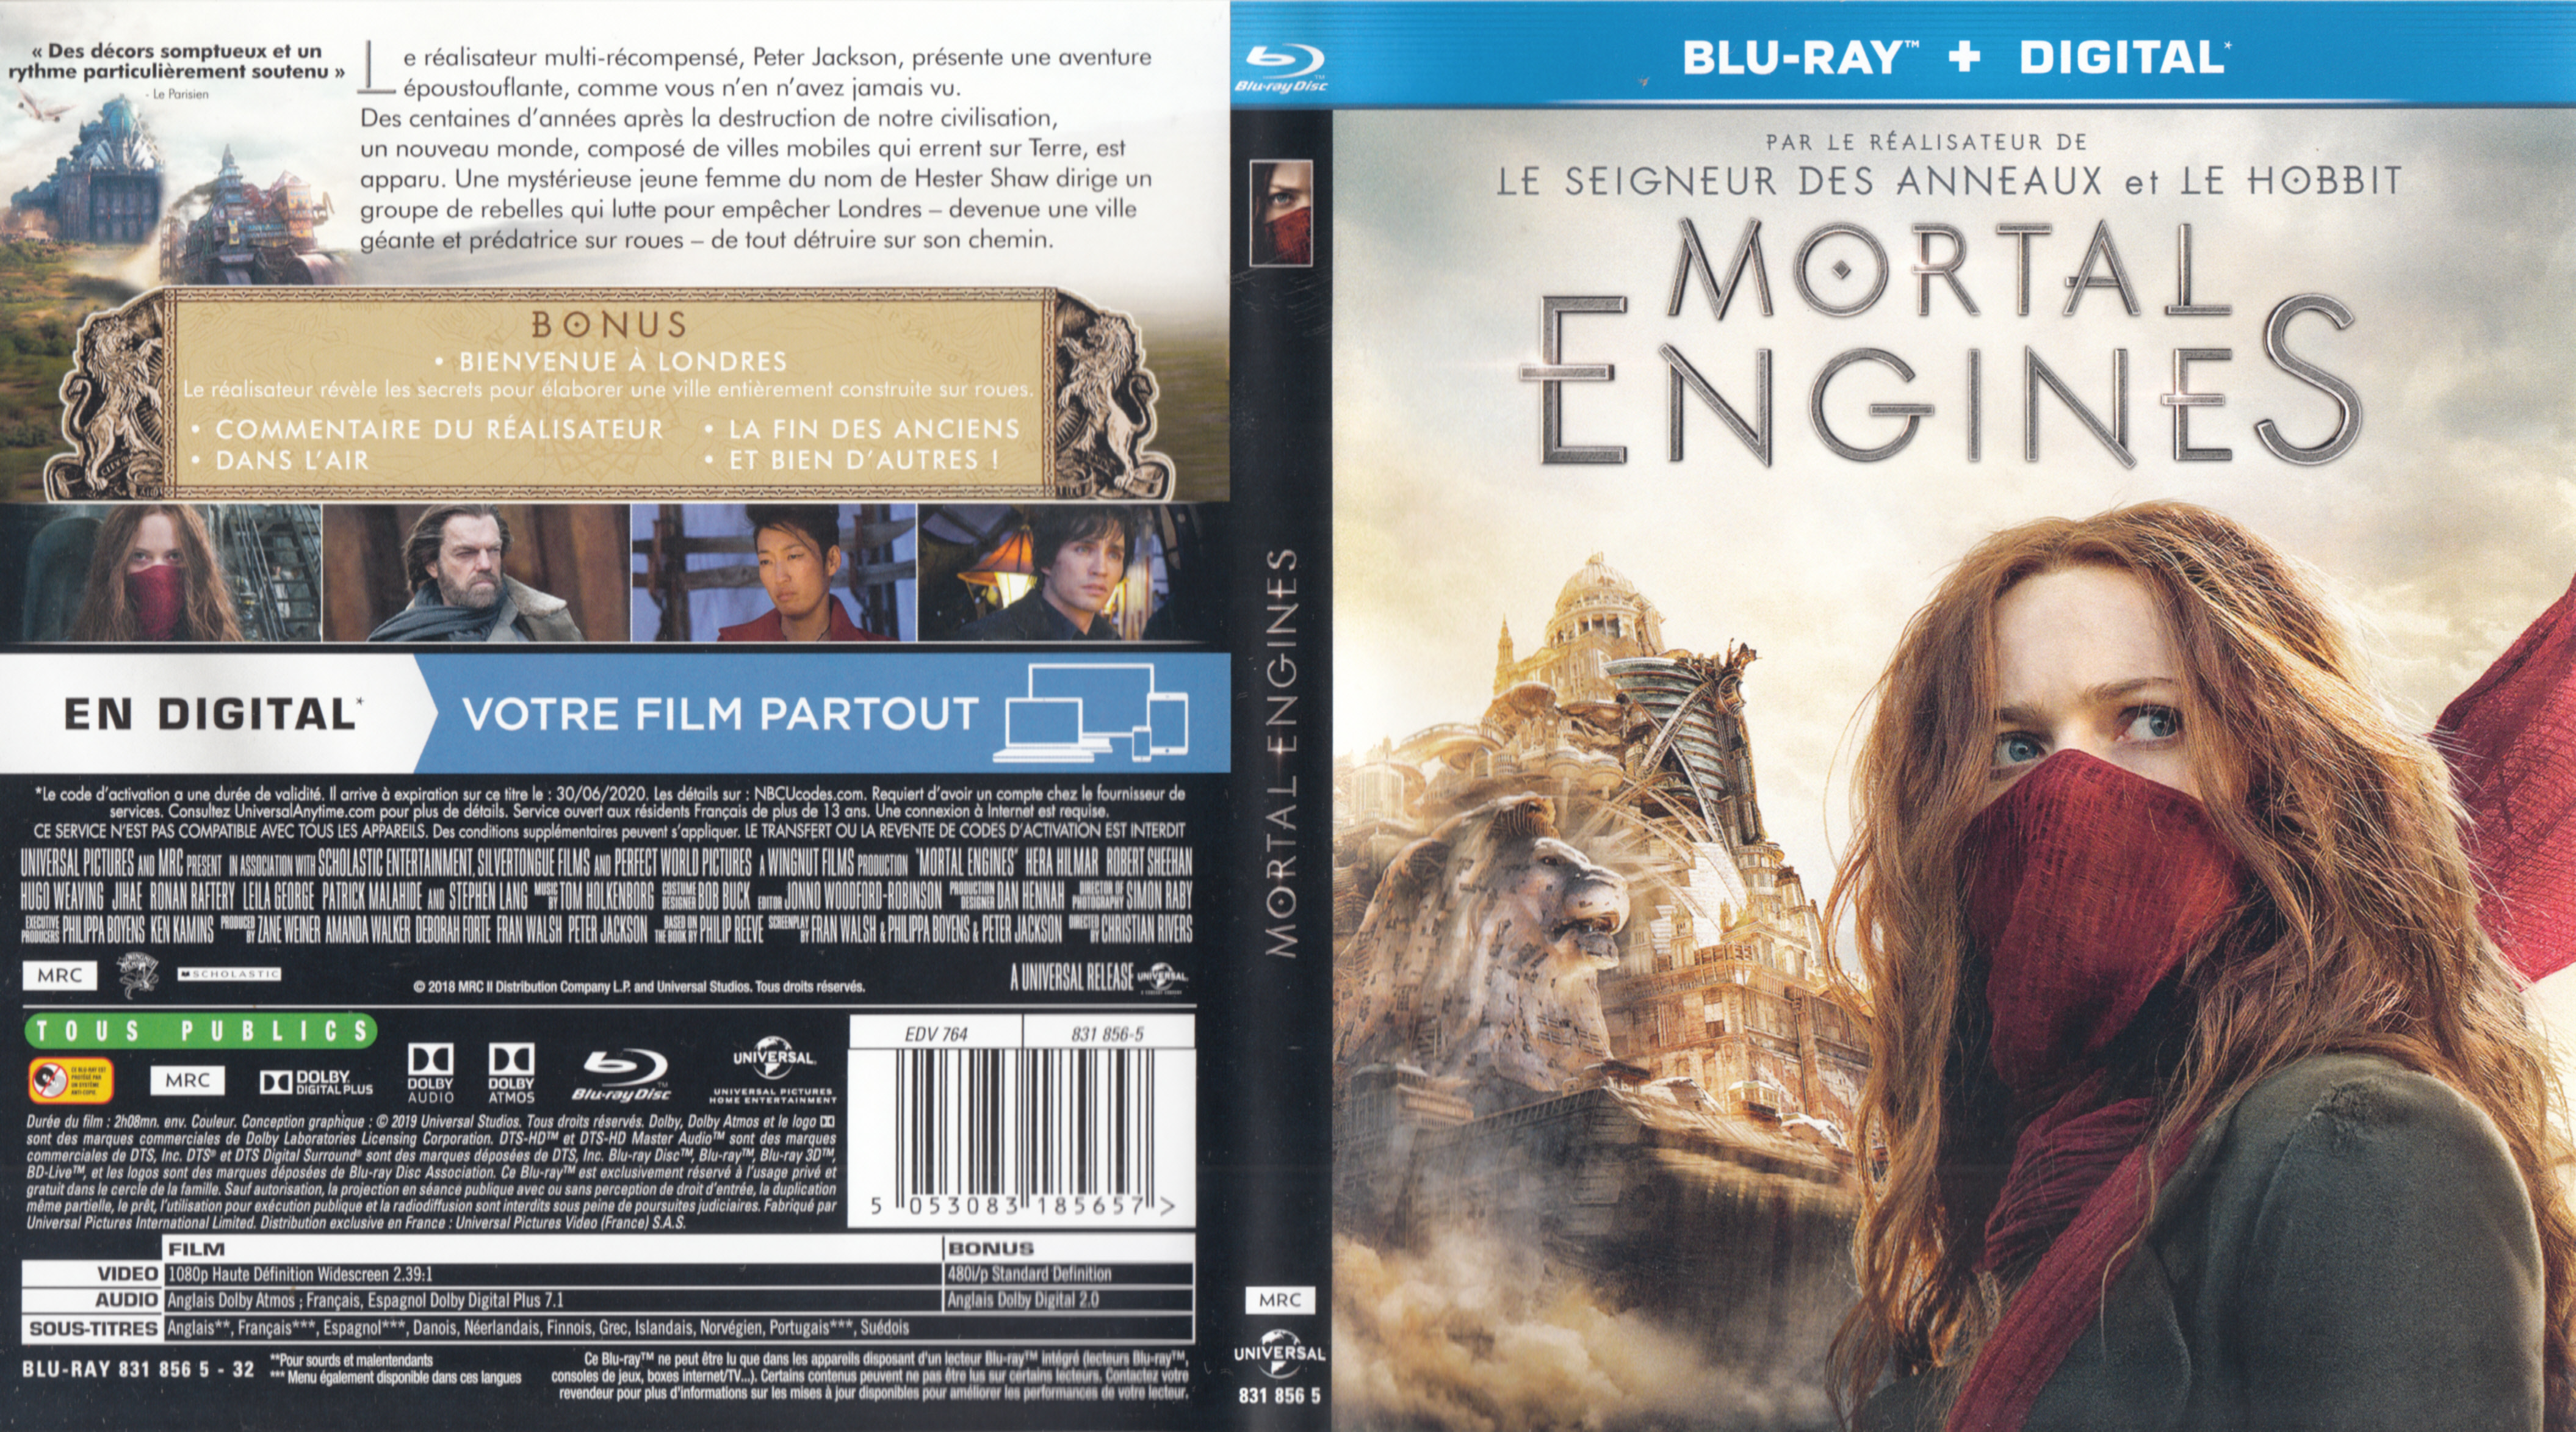 Jaquette DVD Mortal engines (BLU-RAY)